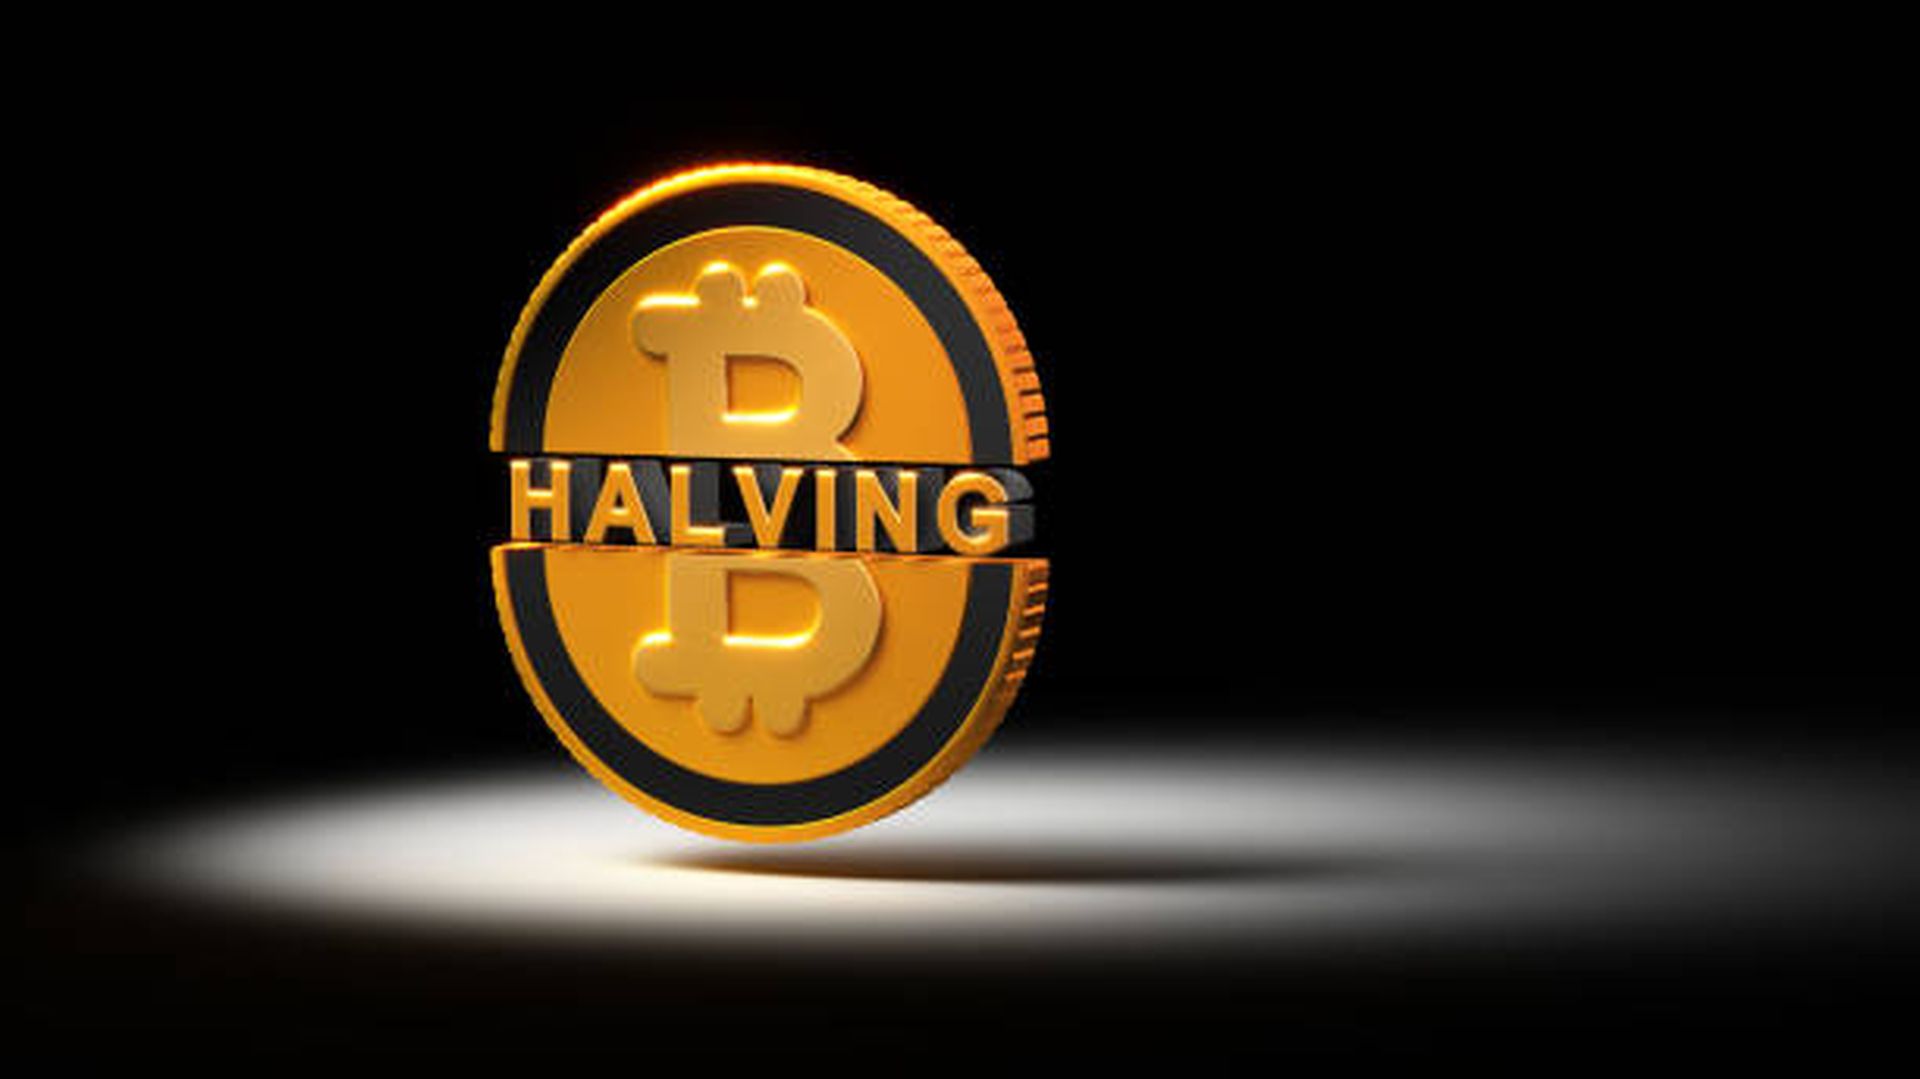 Does Bitcoin’s Halving Affect Cross-Chain Interoperability Solutions?